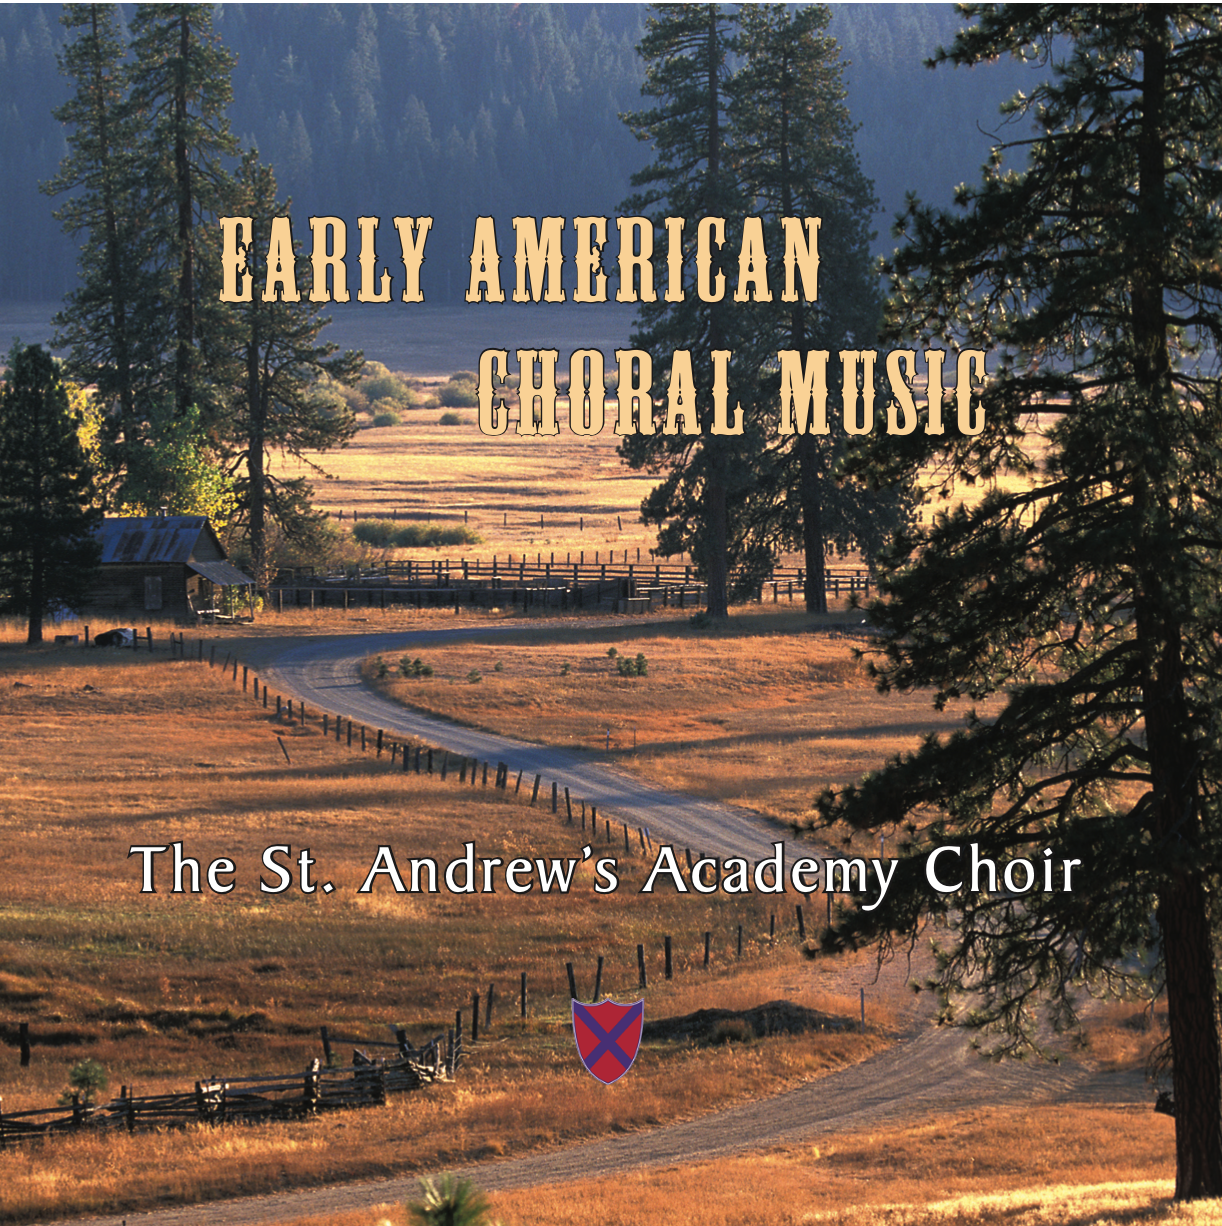 Early American Choral Music • Digital File Download • St. Andrew's Academy Choir